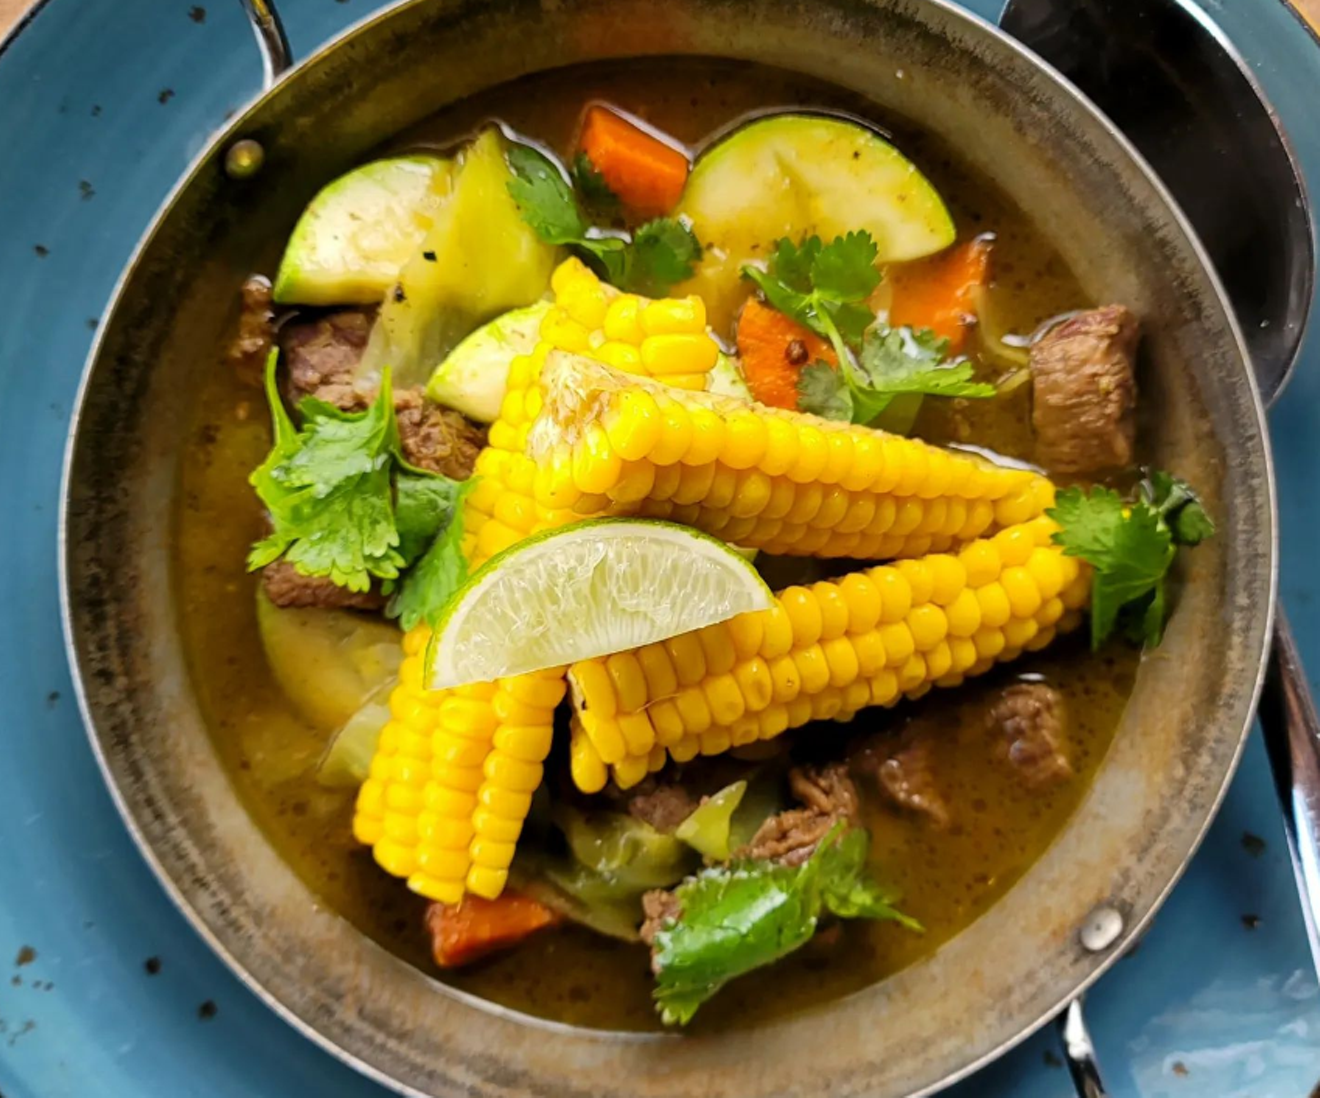 Sancocho is new on the menu at Lucina.